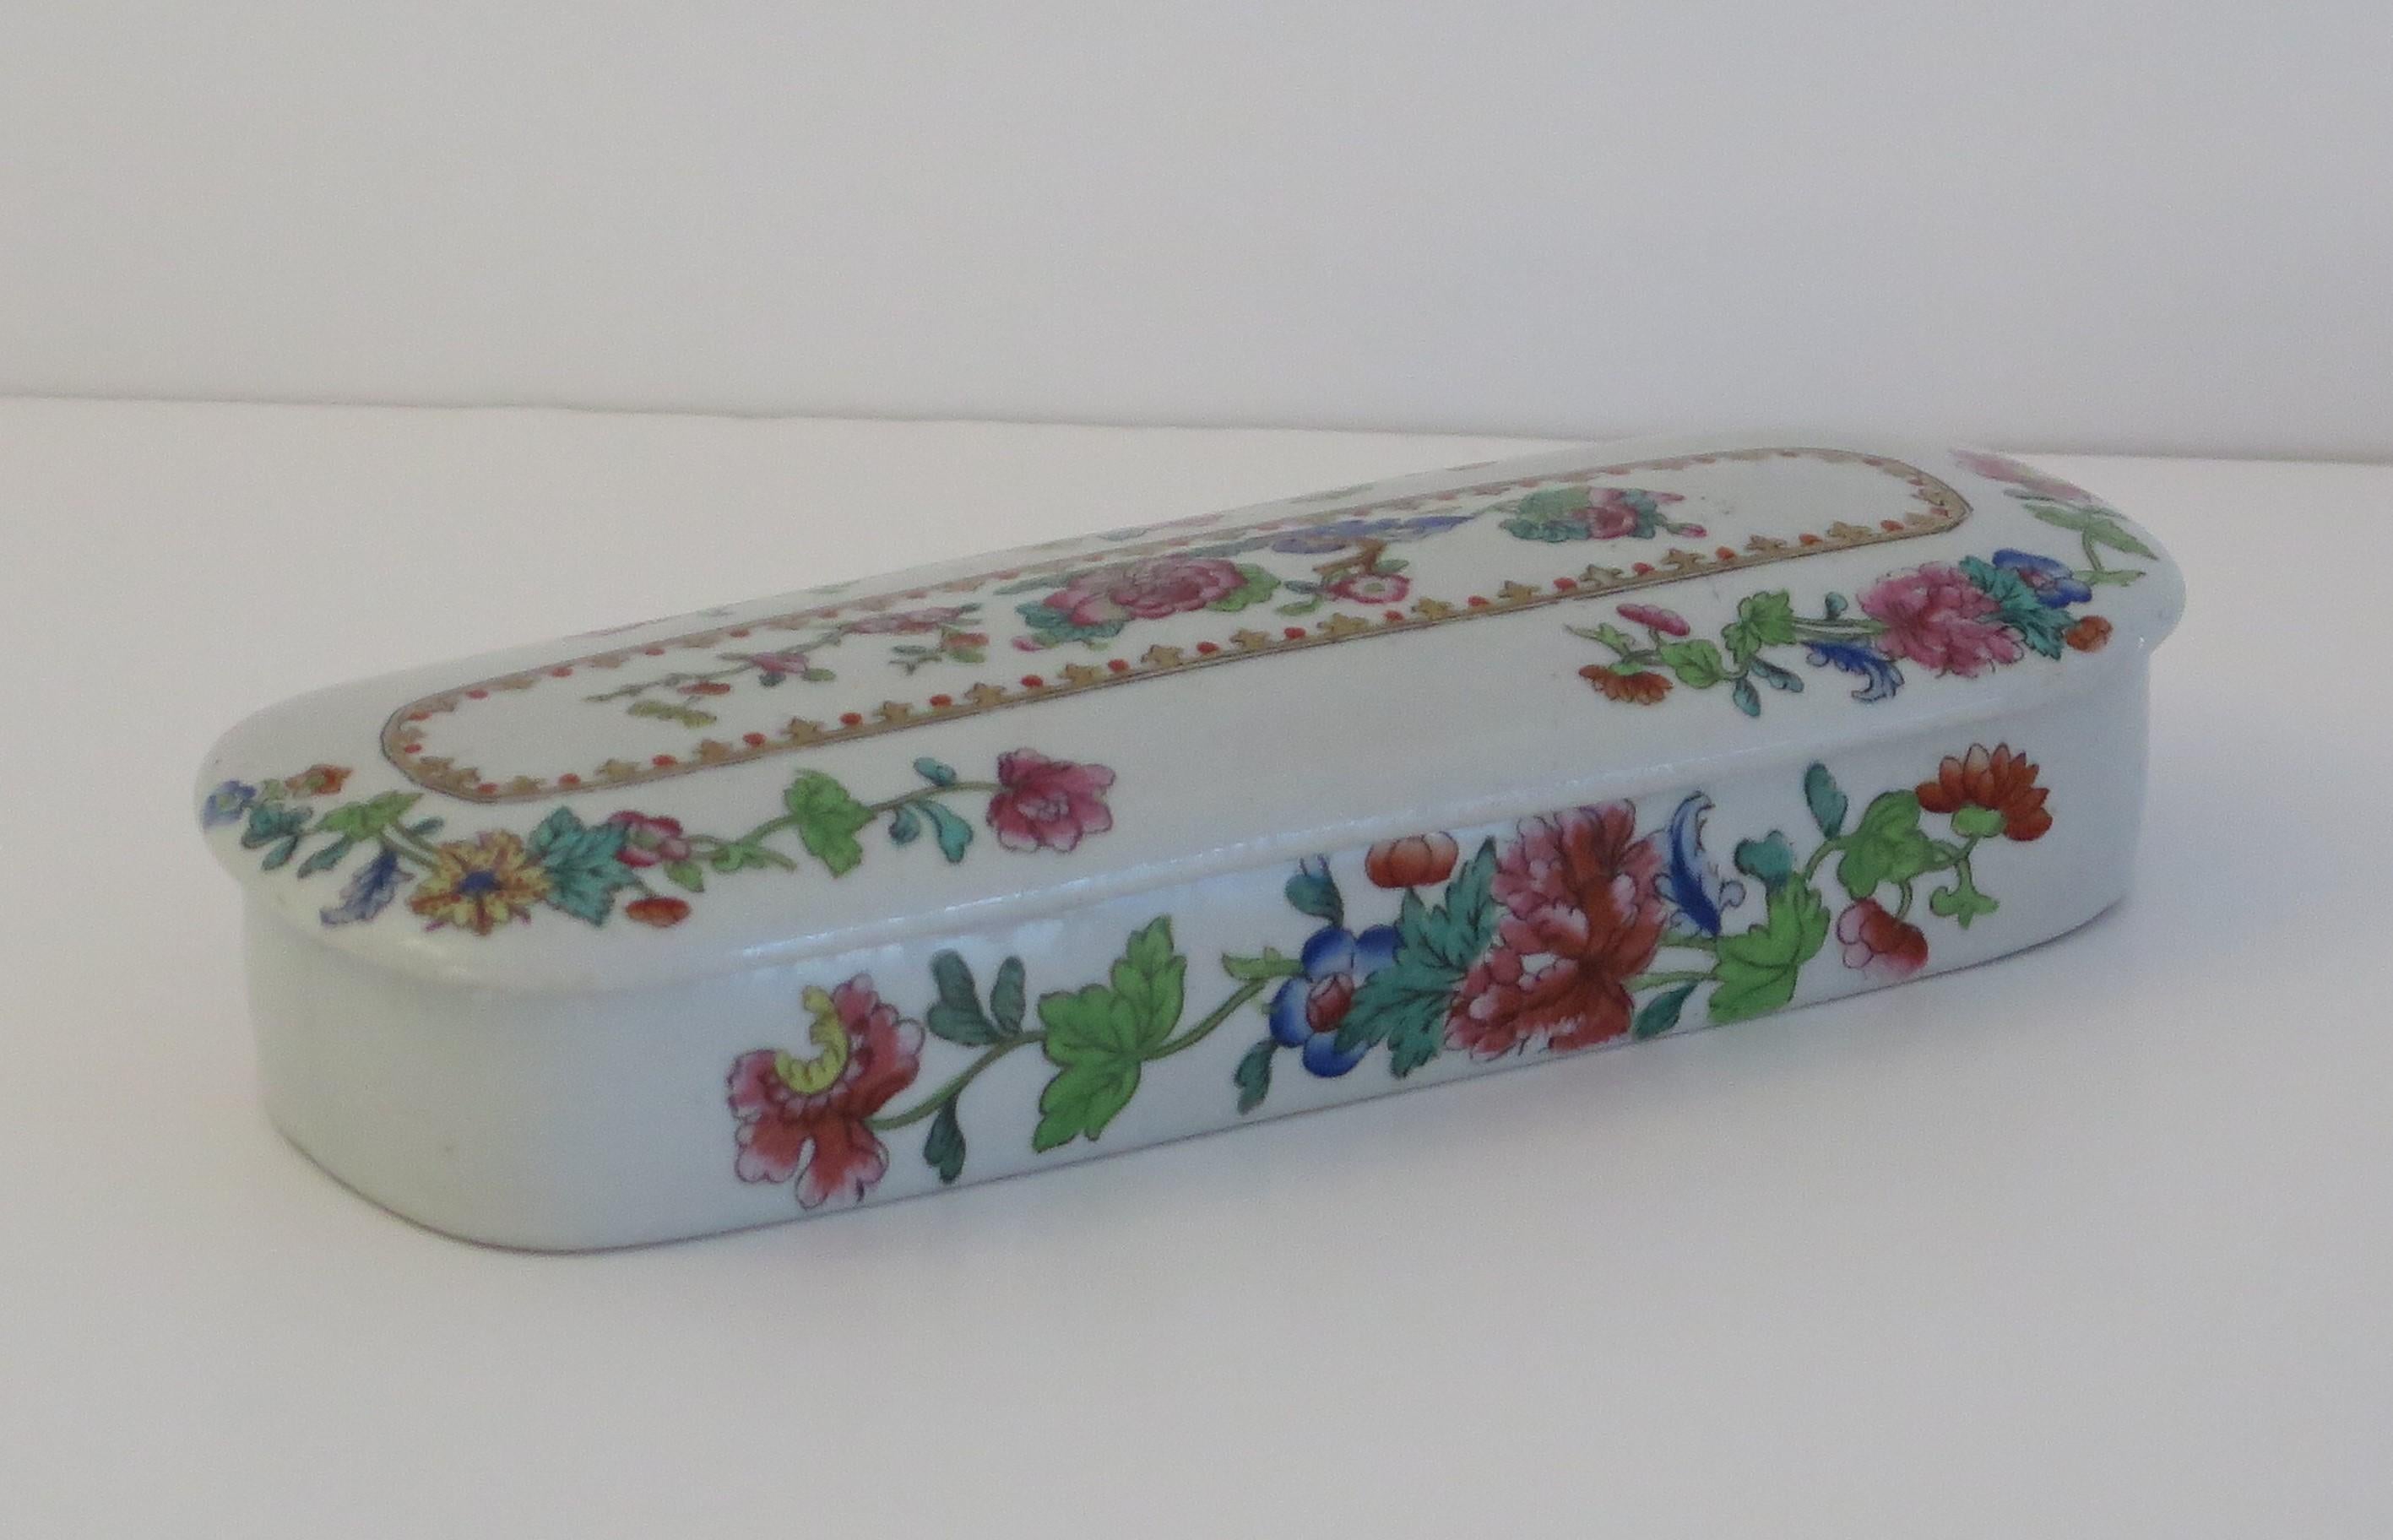 Hand-Painted Georgian Spode Pen Tray 0r Lidded Box Ironstone Willis Pattern 2147, circa 1810 For Sale